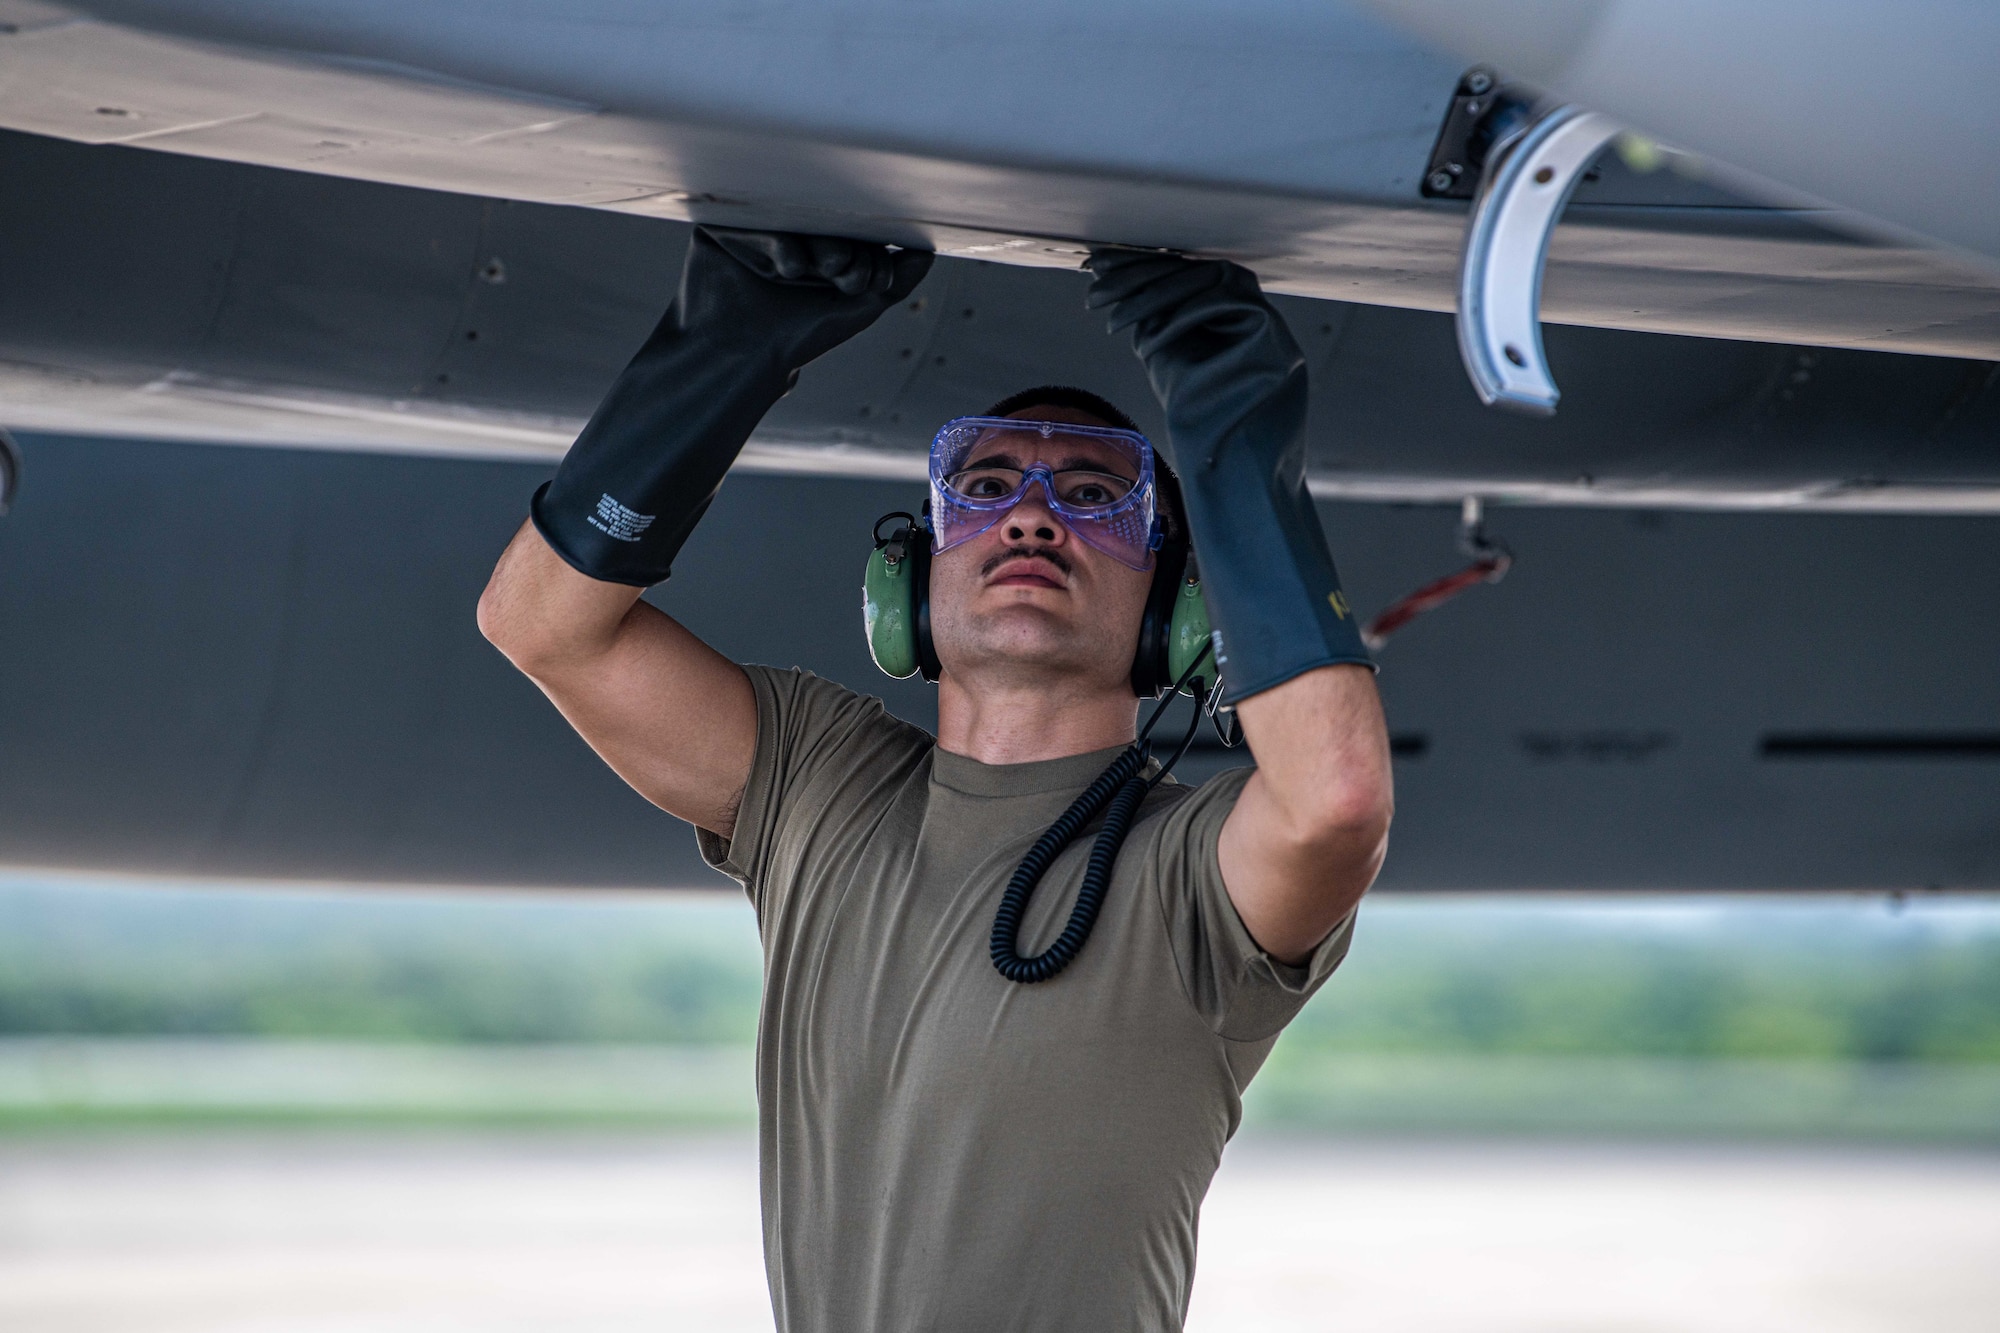 An Airman completes a refueling.